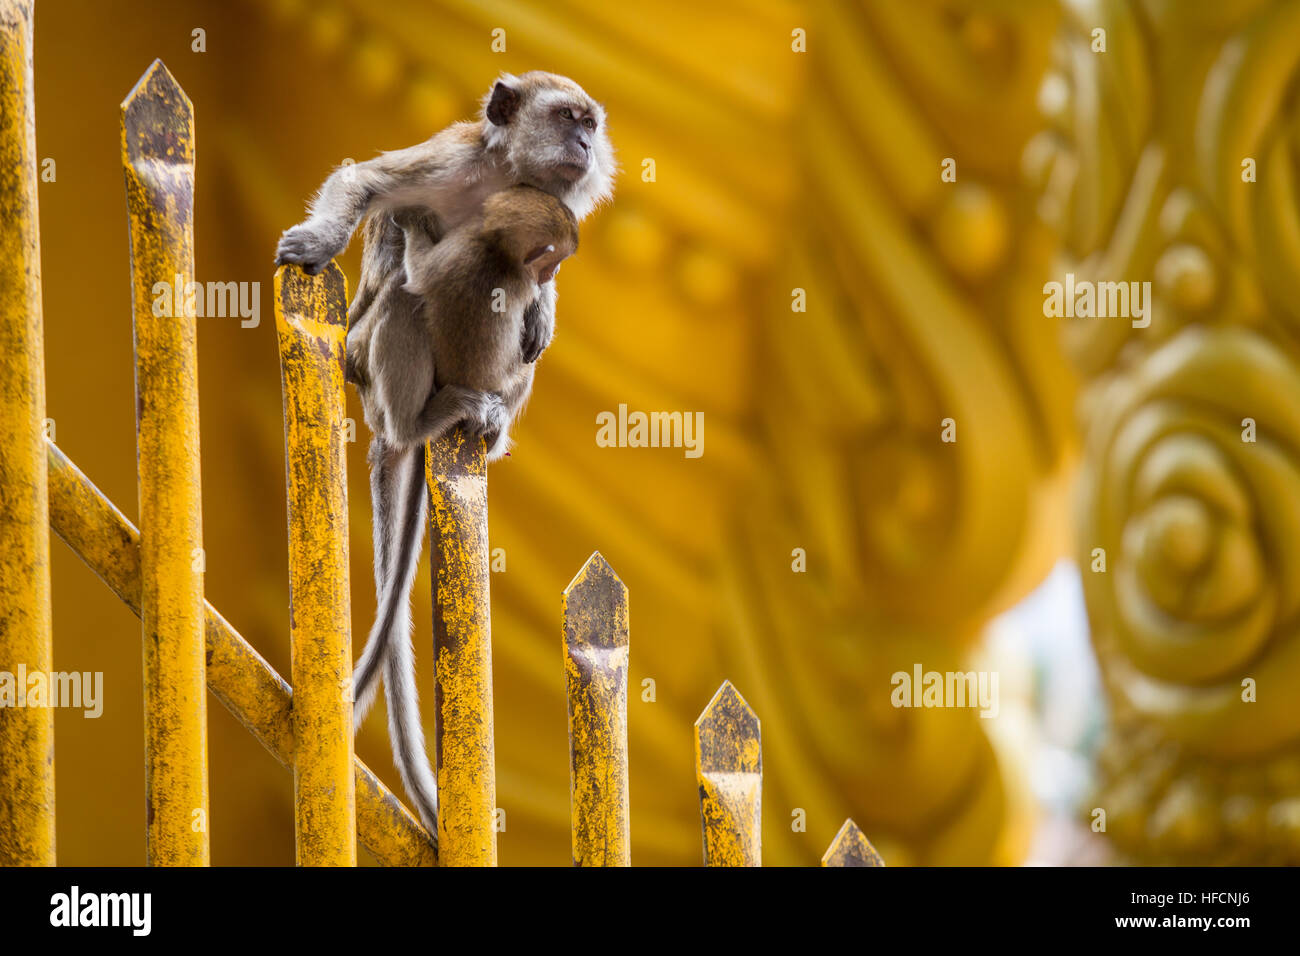 A macaque long-tail monkey female rests with her baby at Batu Caves Hindu temple in Kuala Lumpur, Malaysia Stock Photo